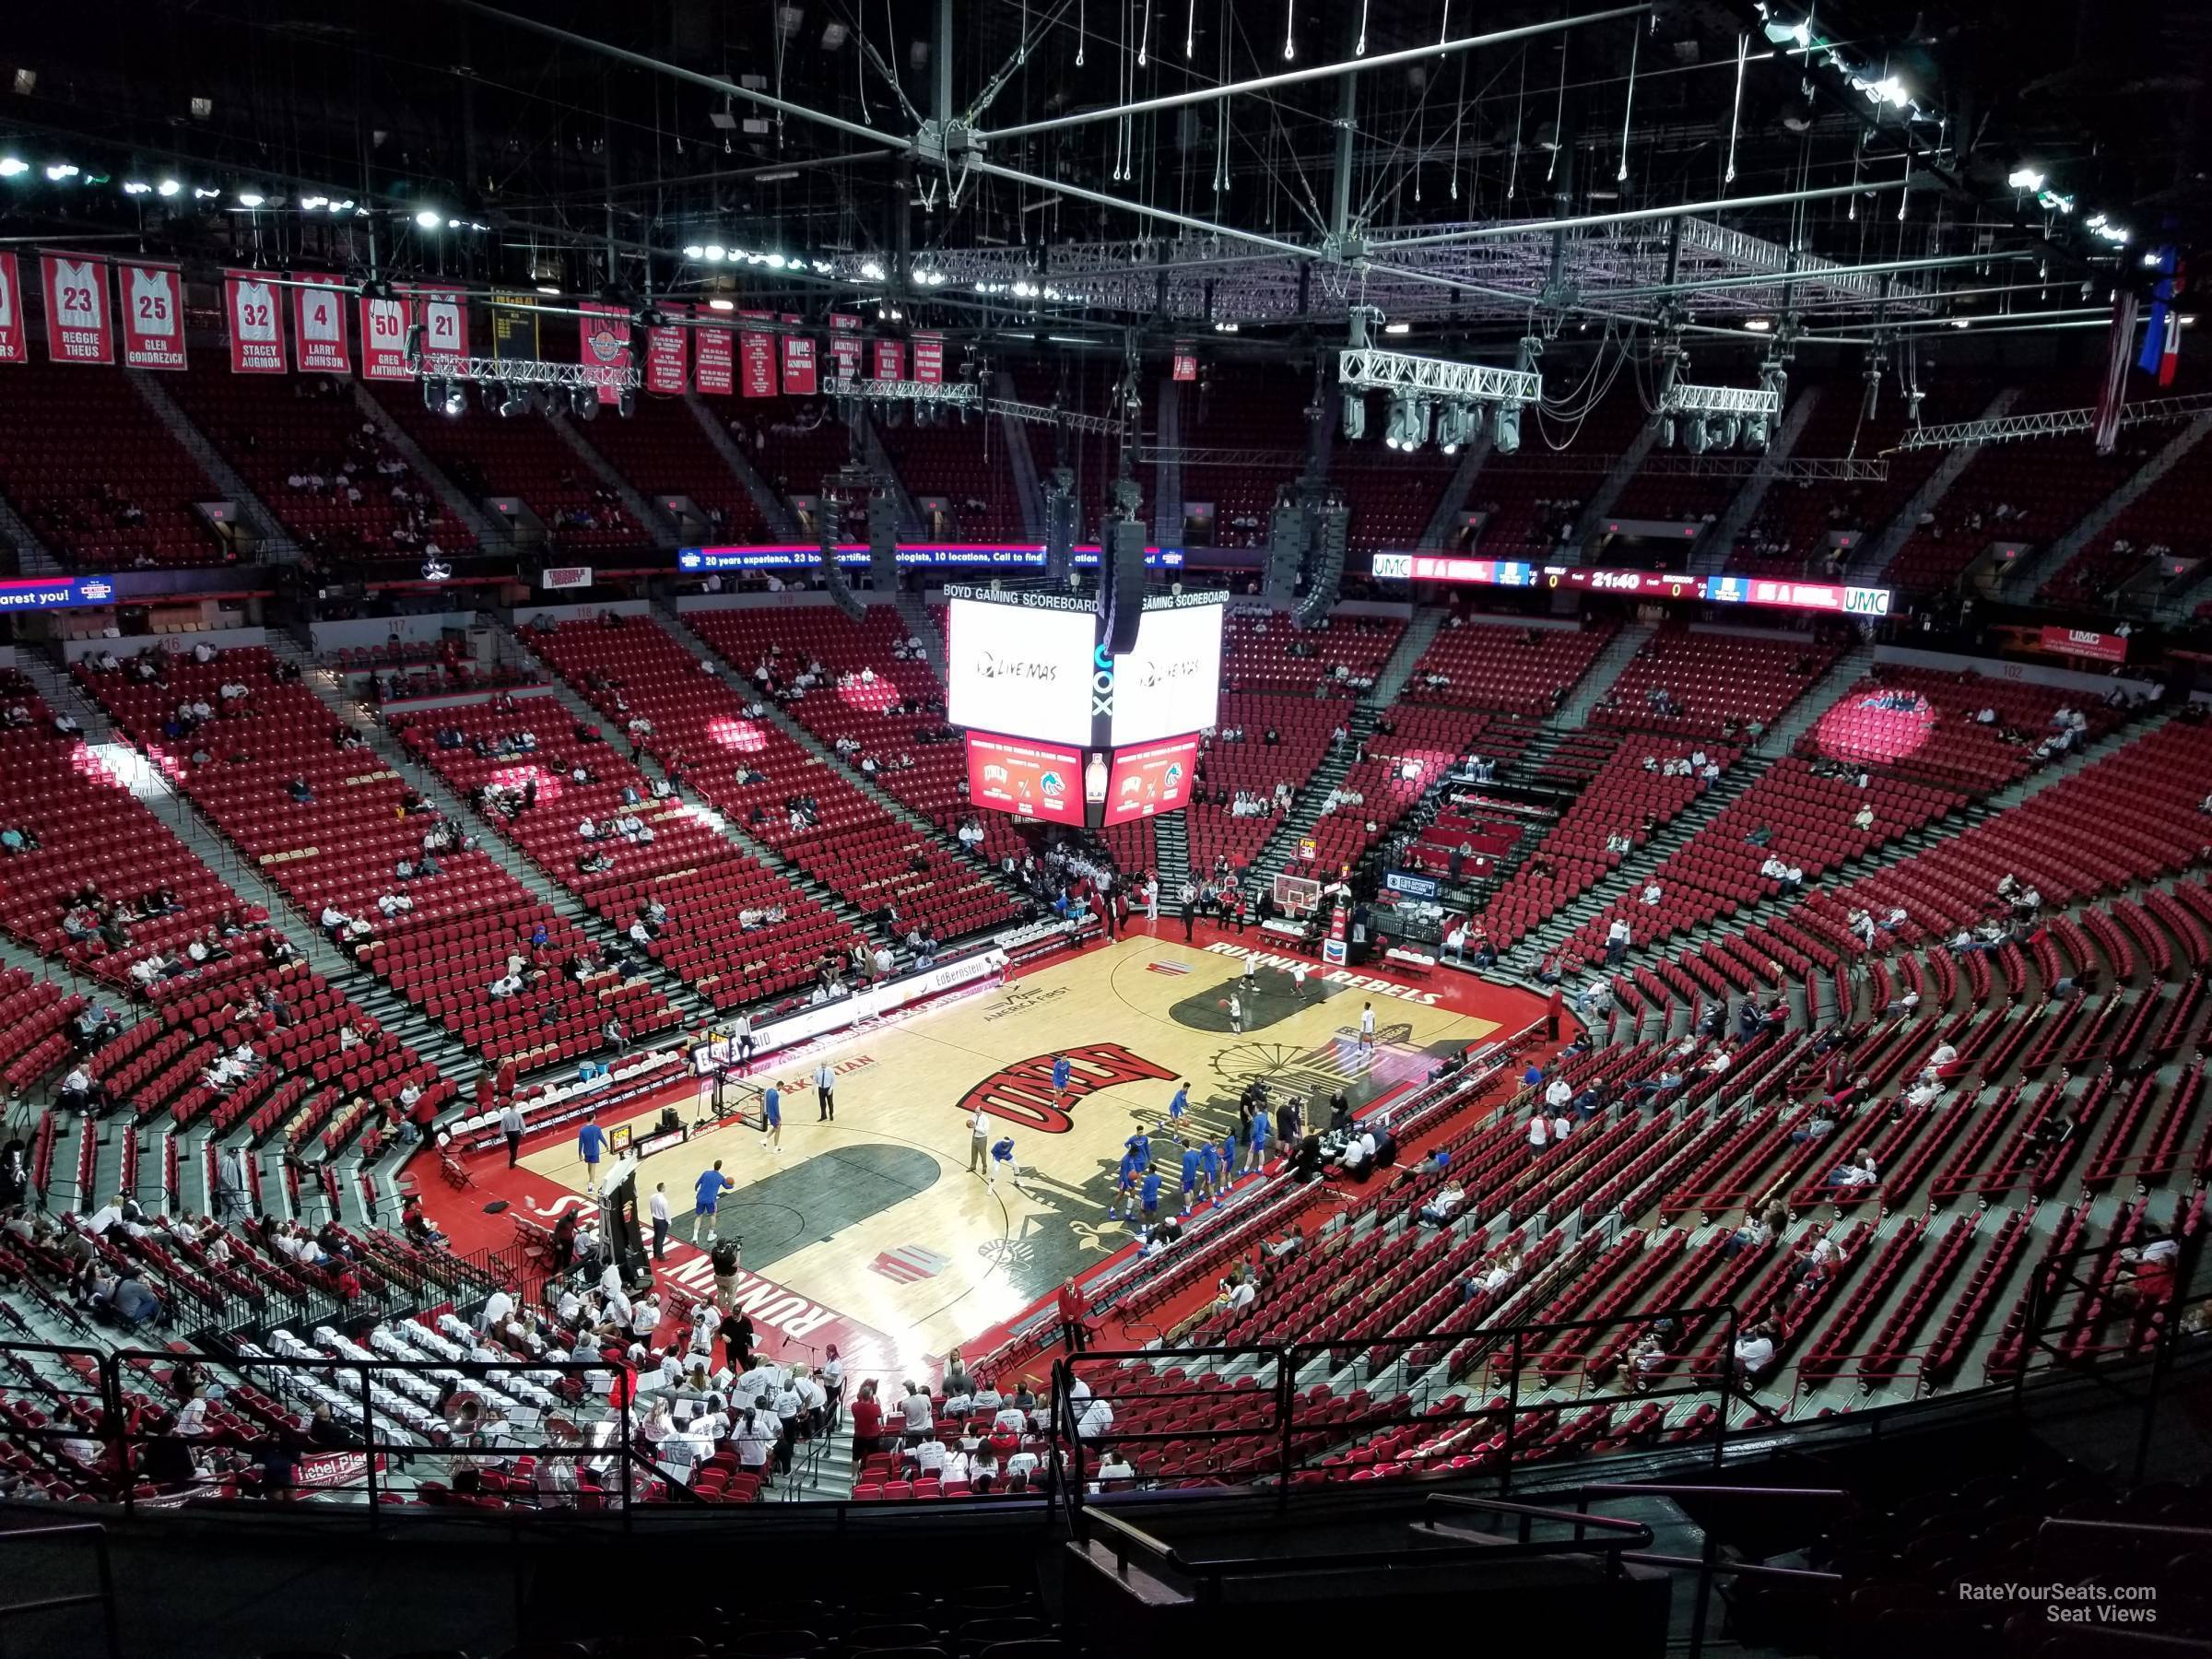 section 214, row l seat view  - thomas and mack center